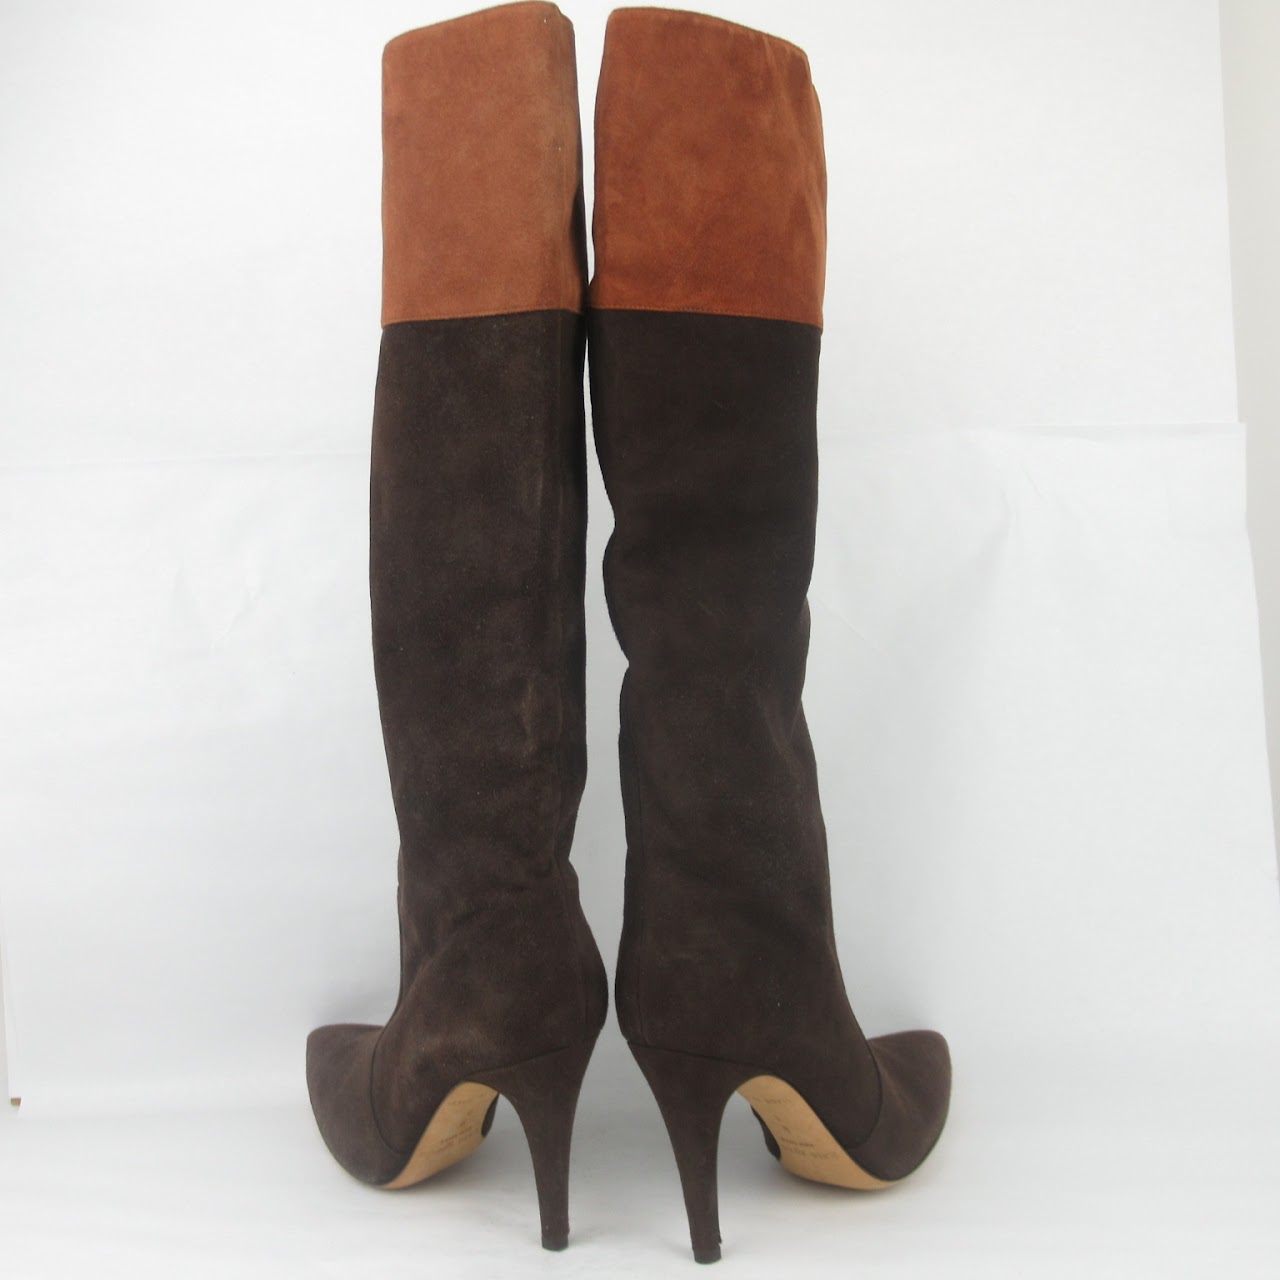 Kate Spade Suede Leather Calf Boots